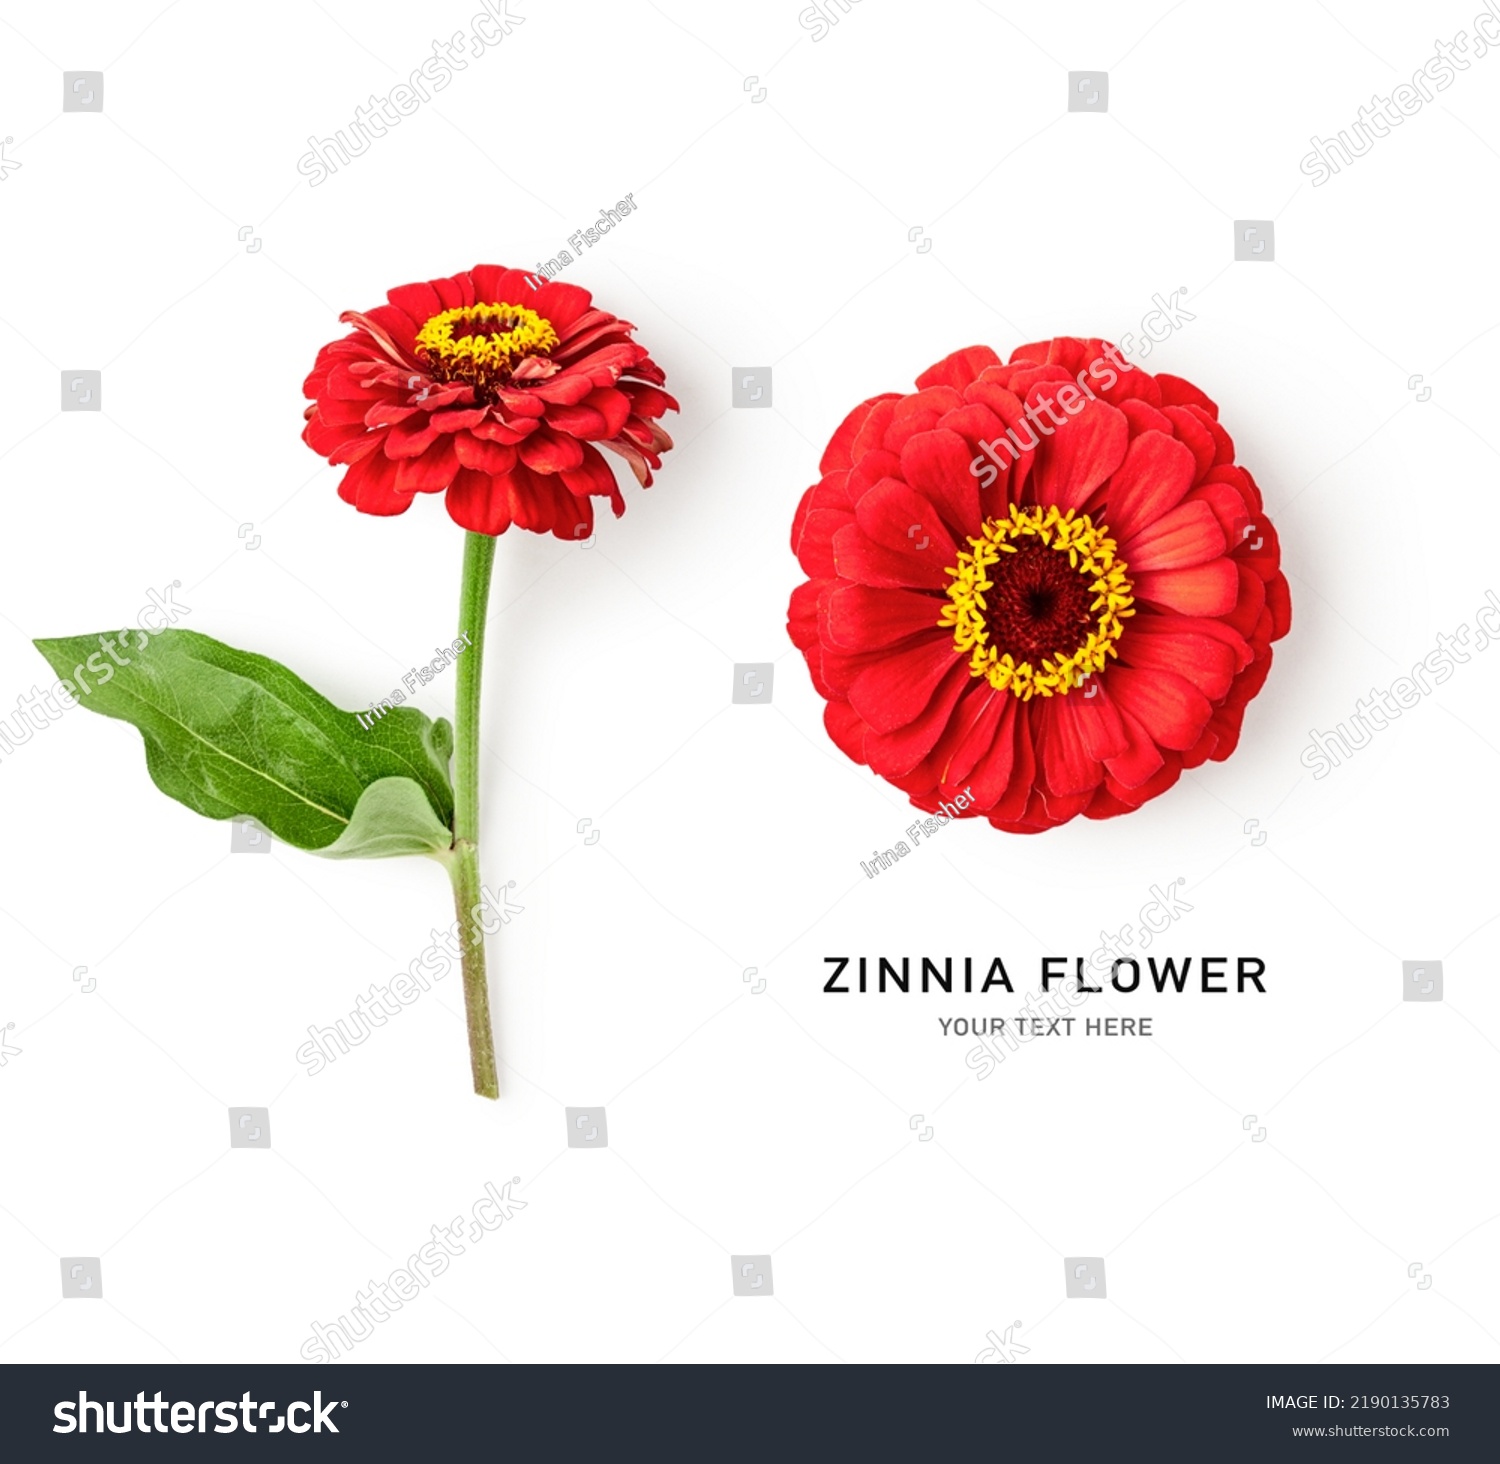 Zinnia flower creative layout. Red flowers with stem and leaves isolated on white background. Floral composition. Design element. Summer garden concept. Top view, flat lay 
 #2190135783